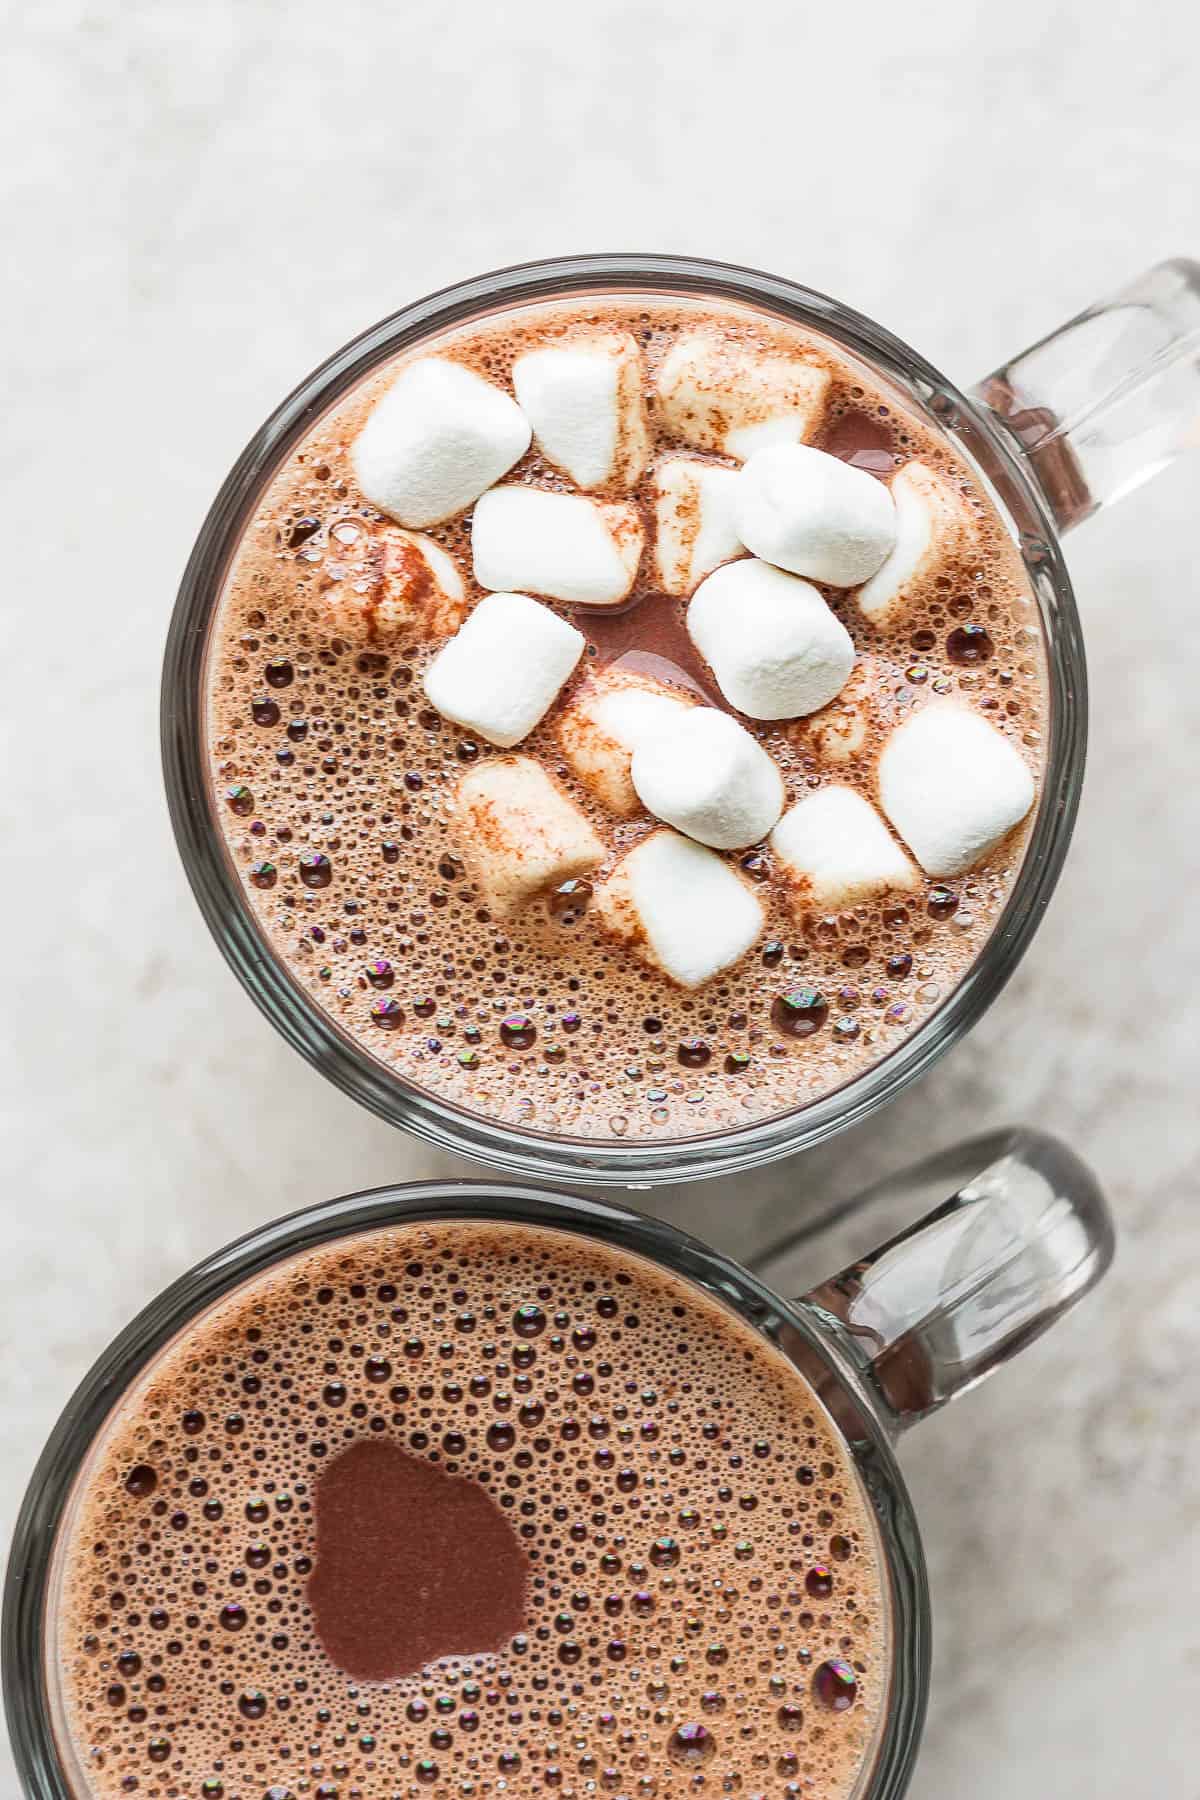 Two mugs of hot chocolate, one topped with marshmallows